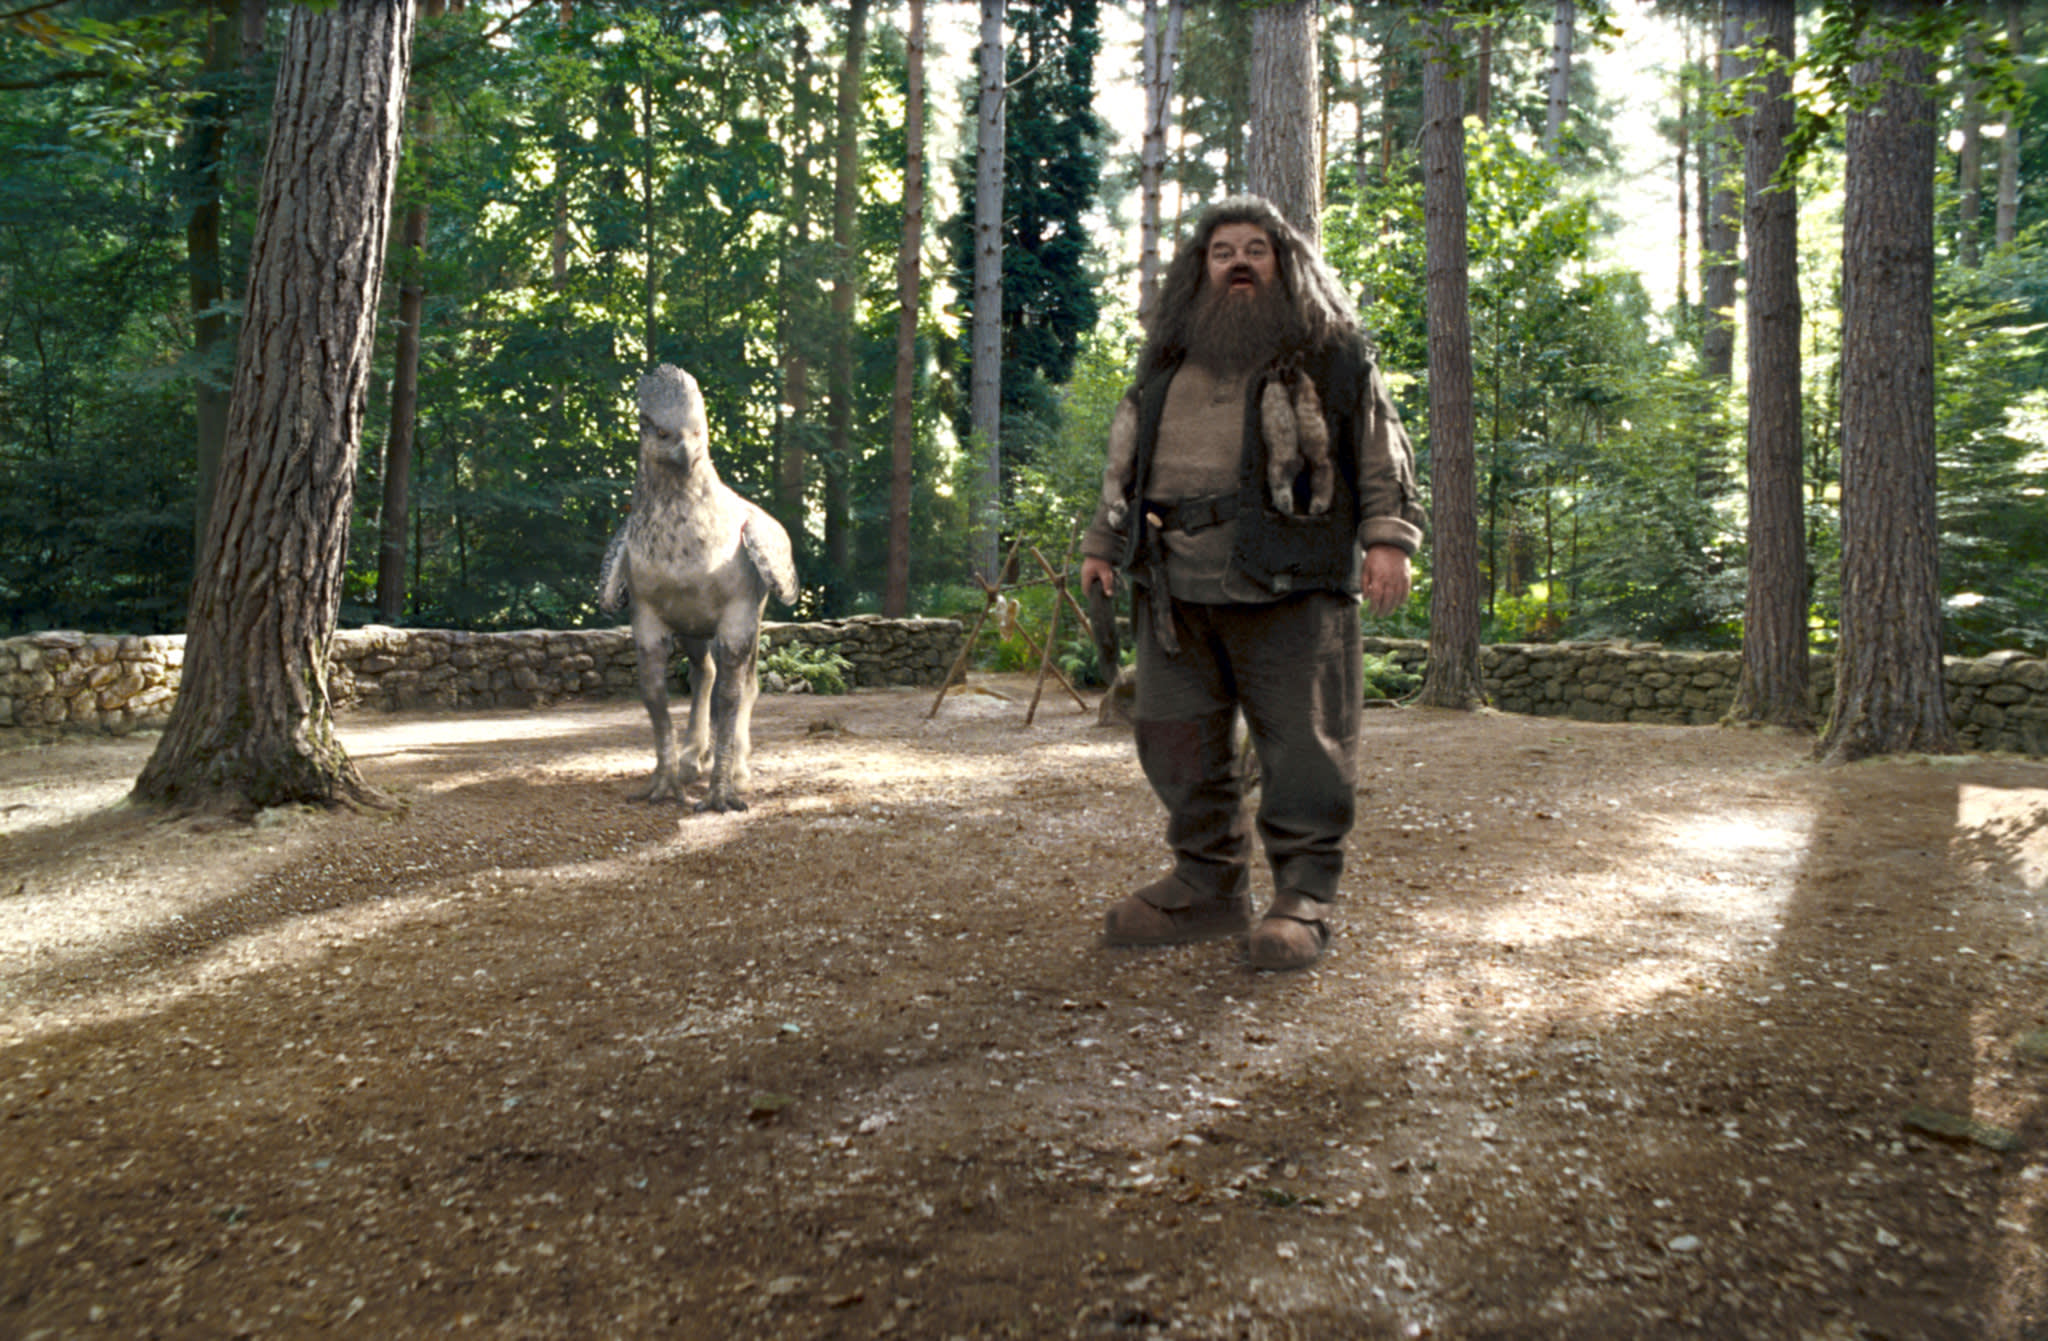 The Harry Potter Movies: A Guide to Hagrid's Kindness and Love for Magical Creatures